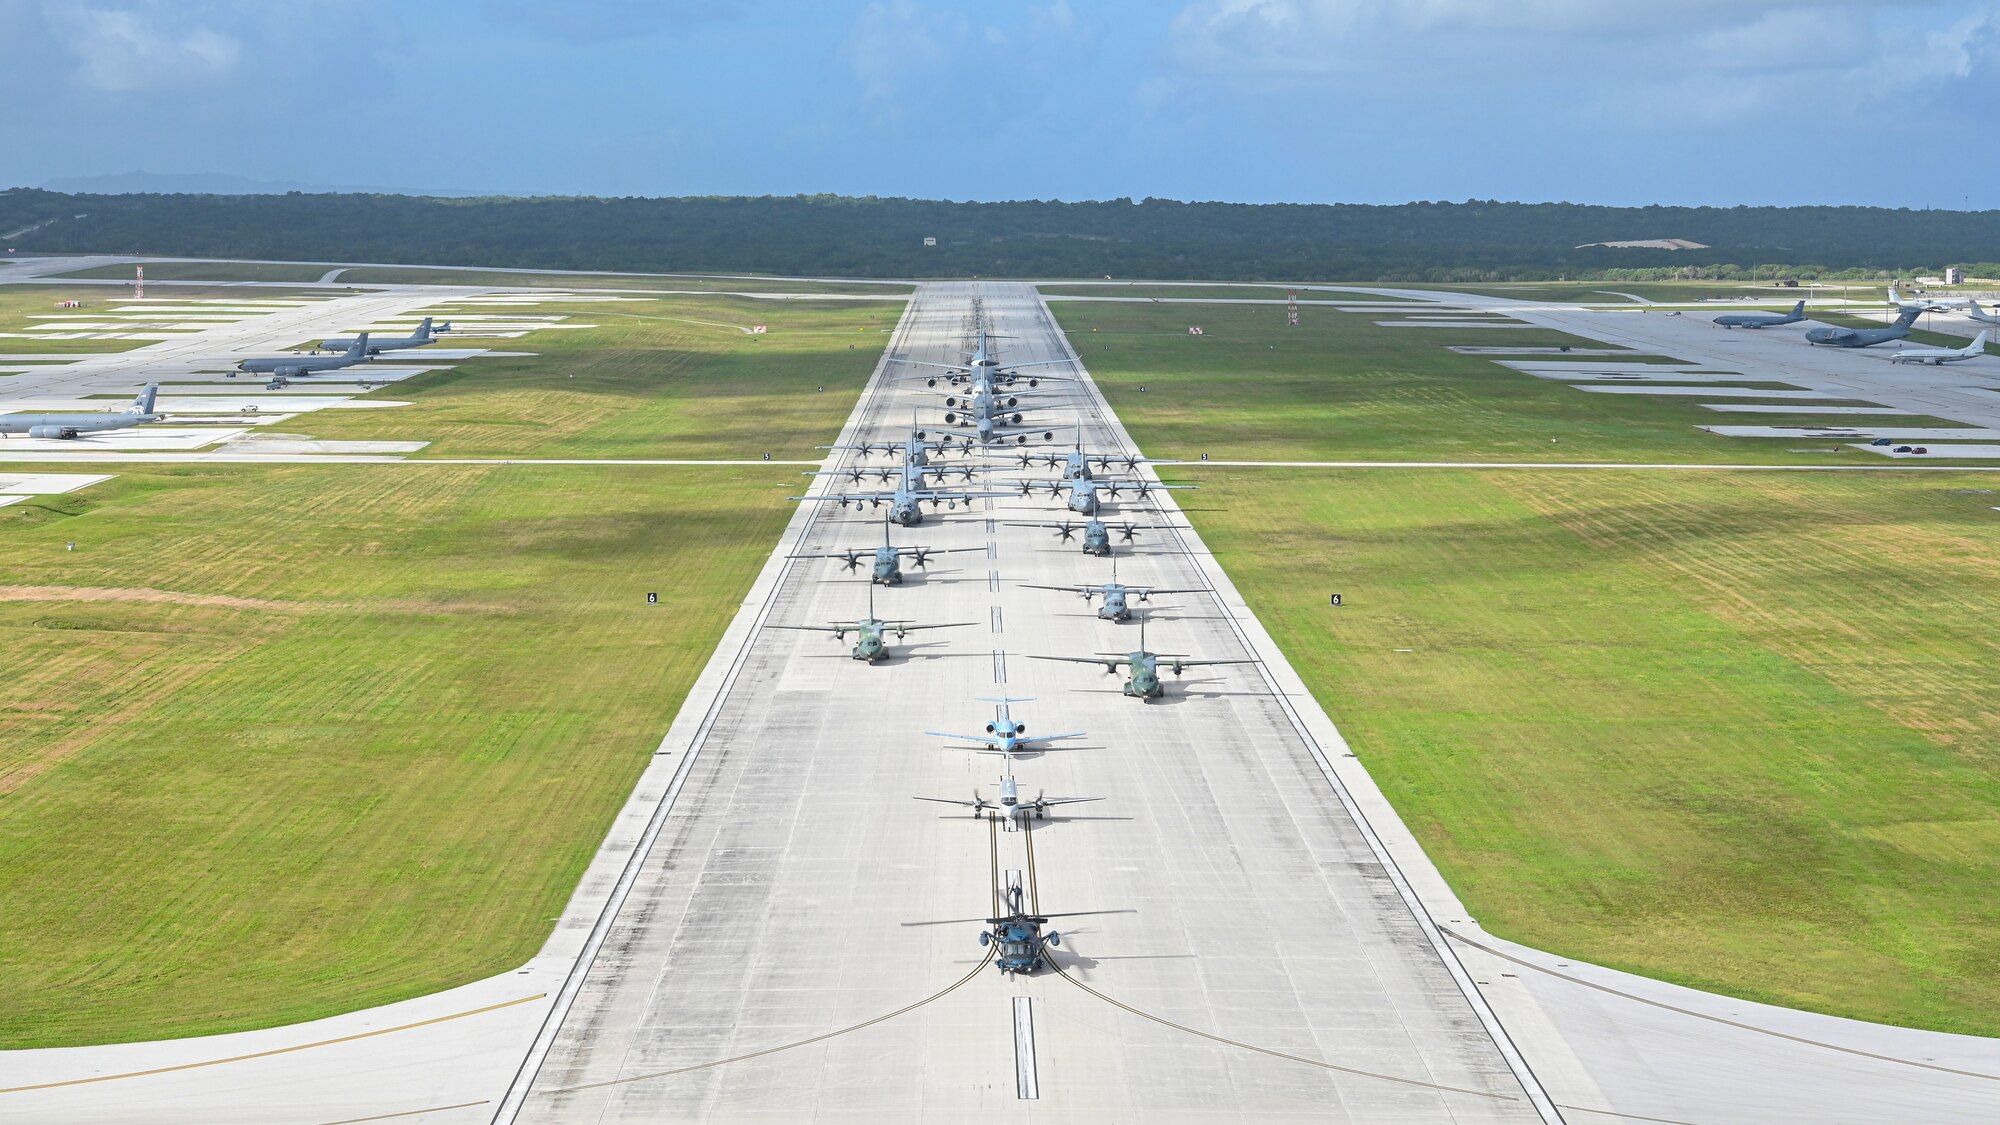 U.S. Air Force, Royal Australian Air Force, Japan Air Self-Defense Force, and regional allies and partners aircraft participate in a close formation taxi, known as an Elephant Walk, during Cope North 2022 at Andersen Air Force Base, Guam, Feb. 5, 2022.